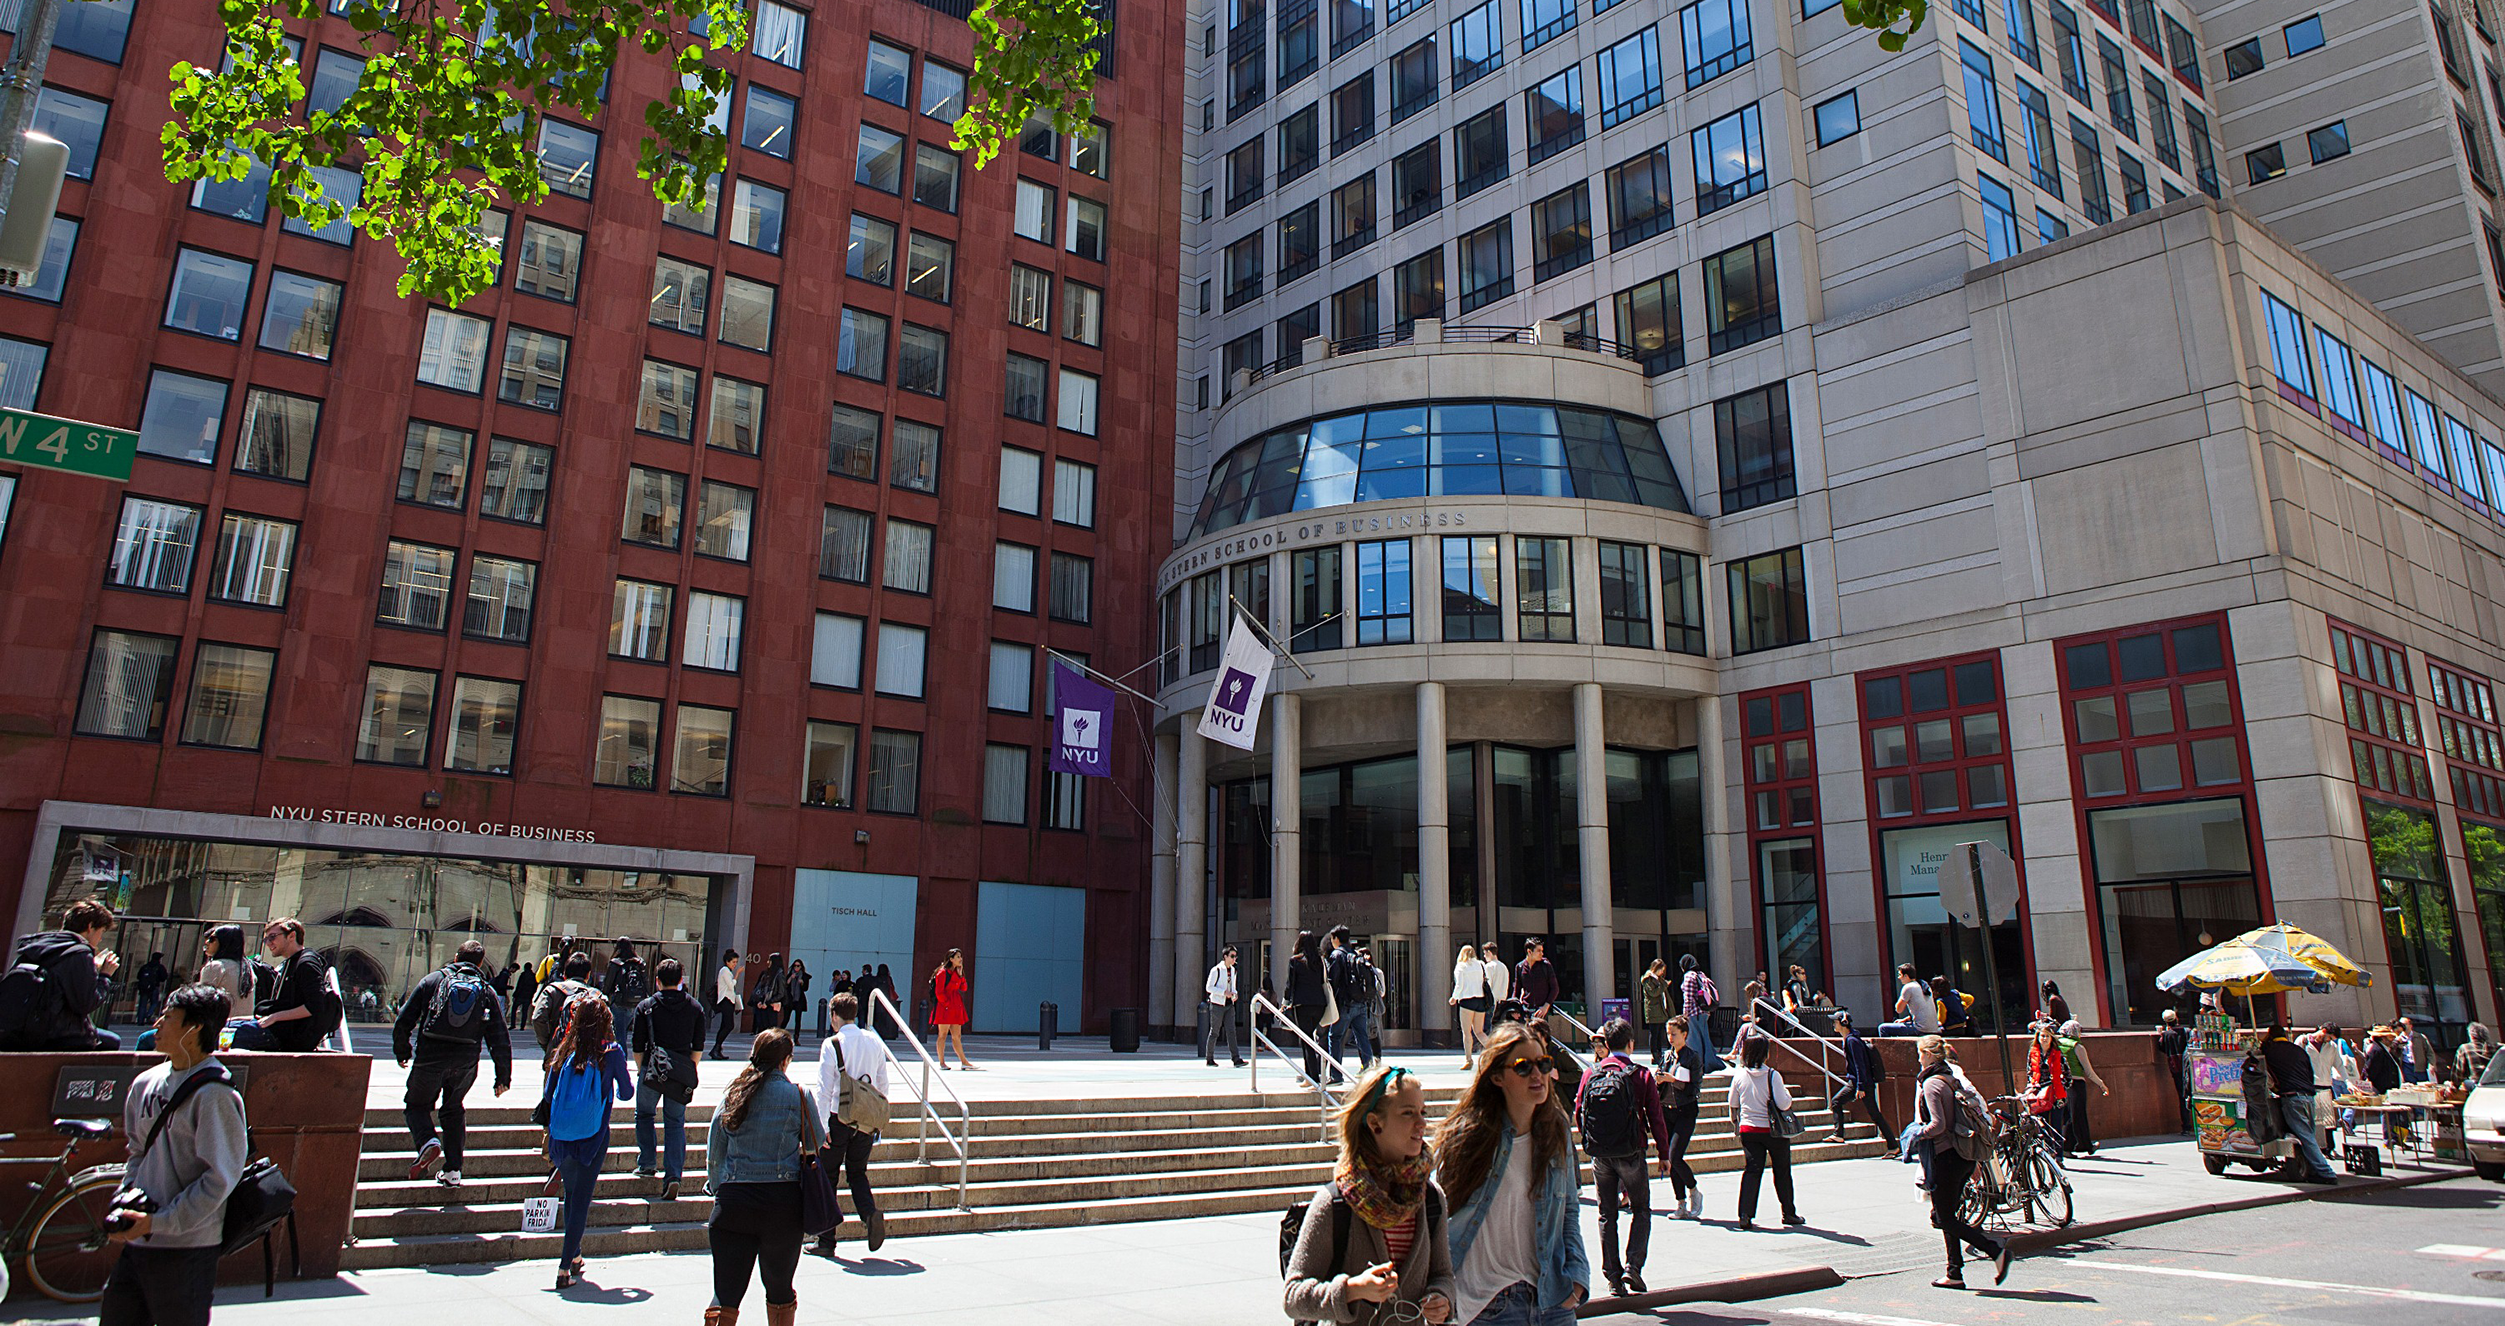 NYU Stern's Kaufman Management Center building and Gould Plaza